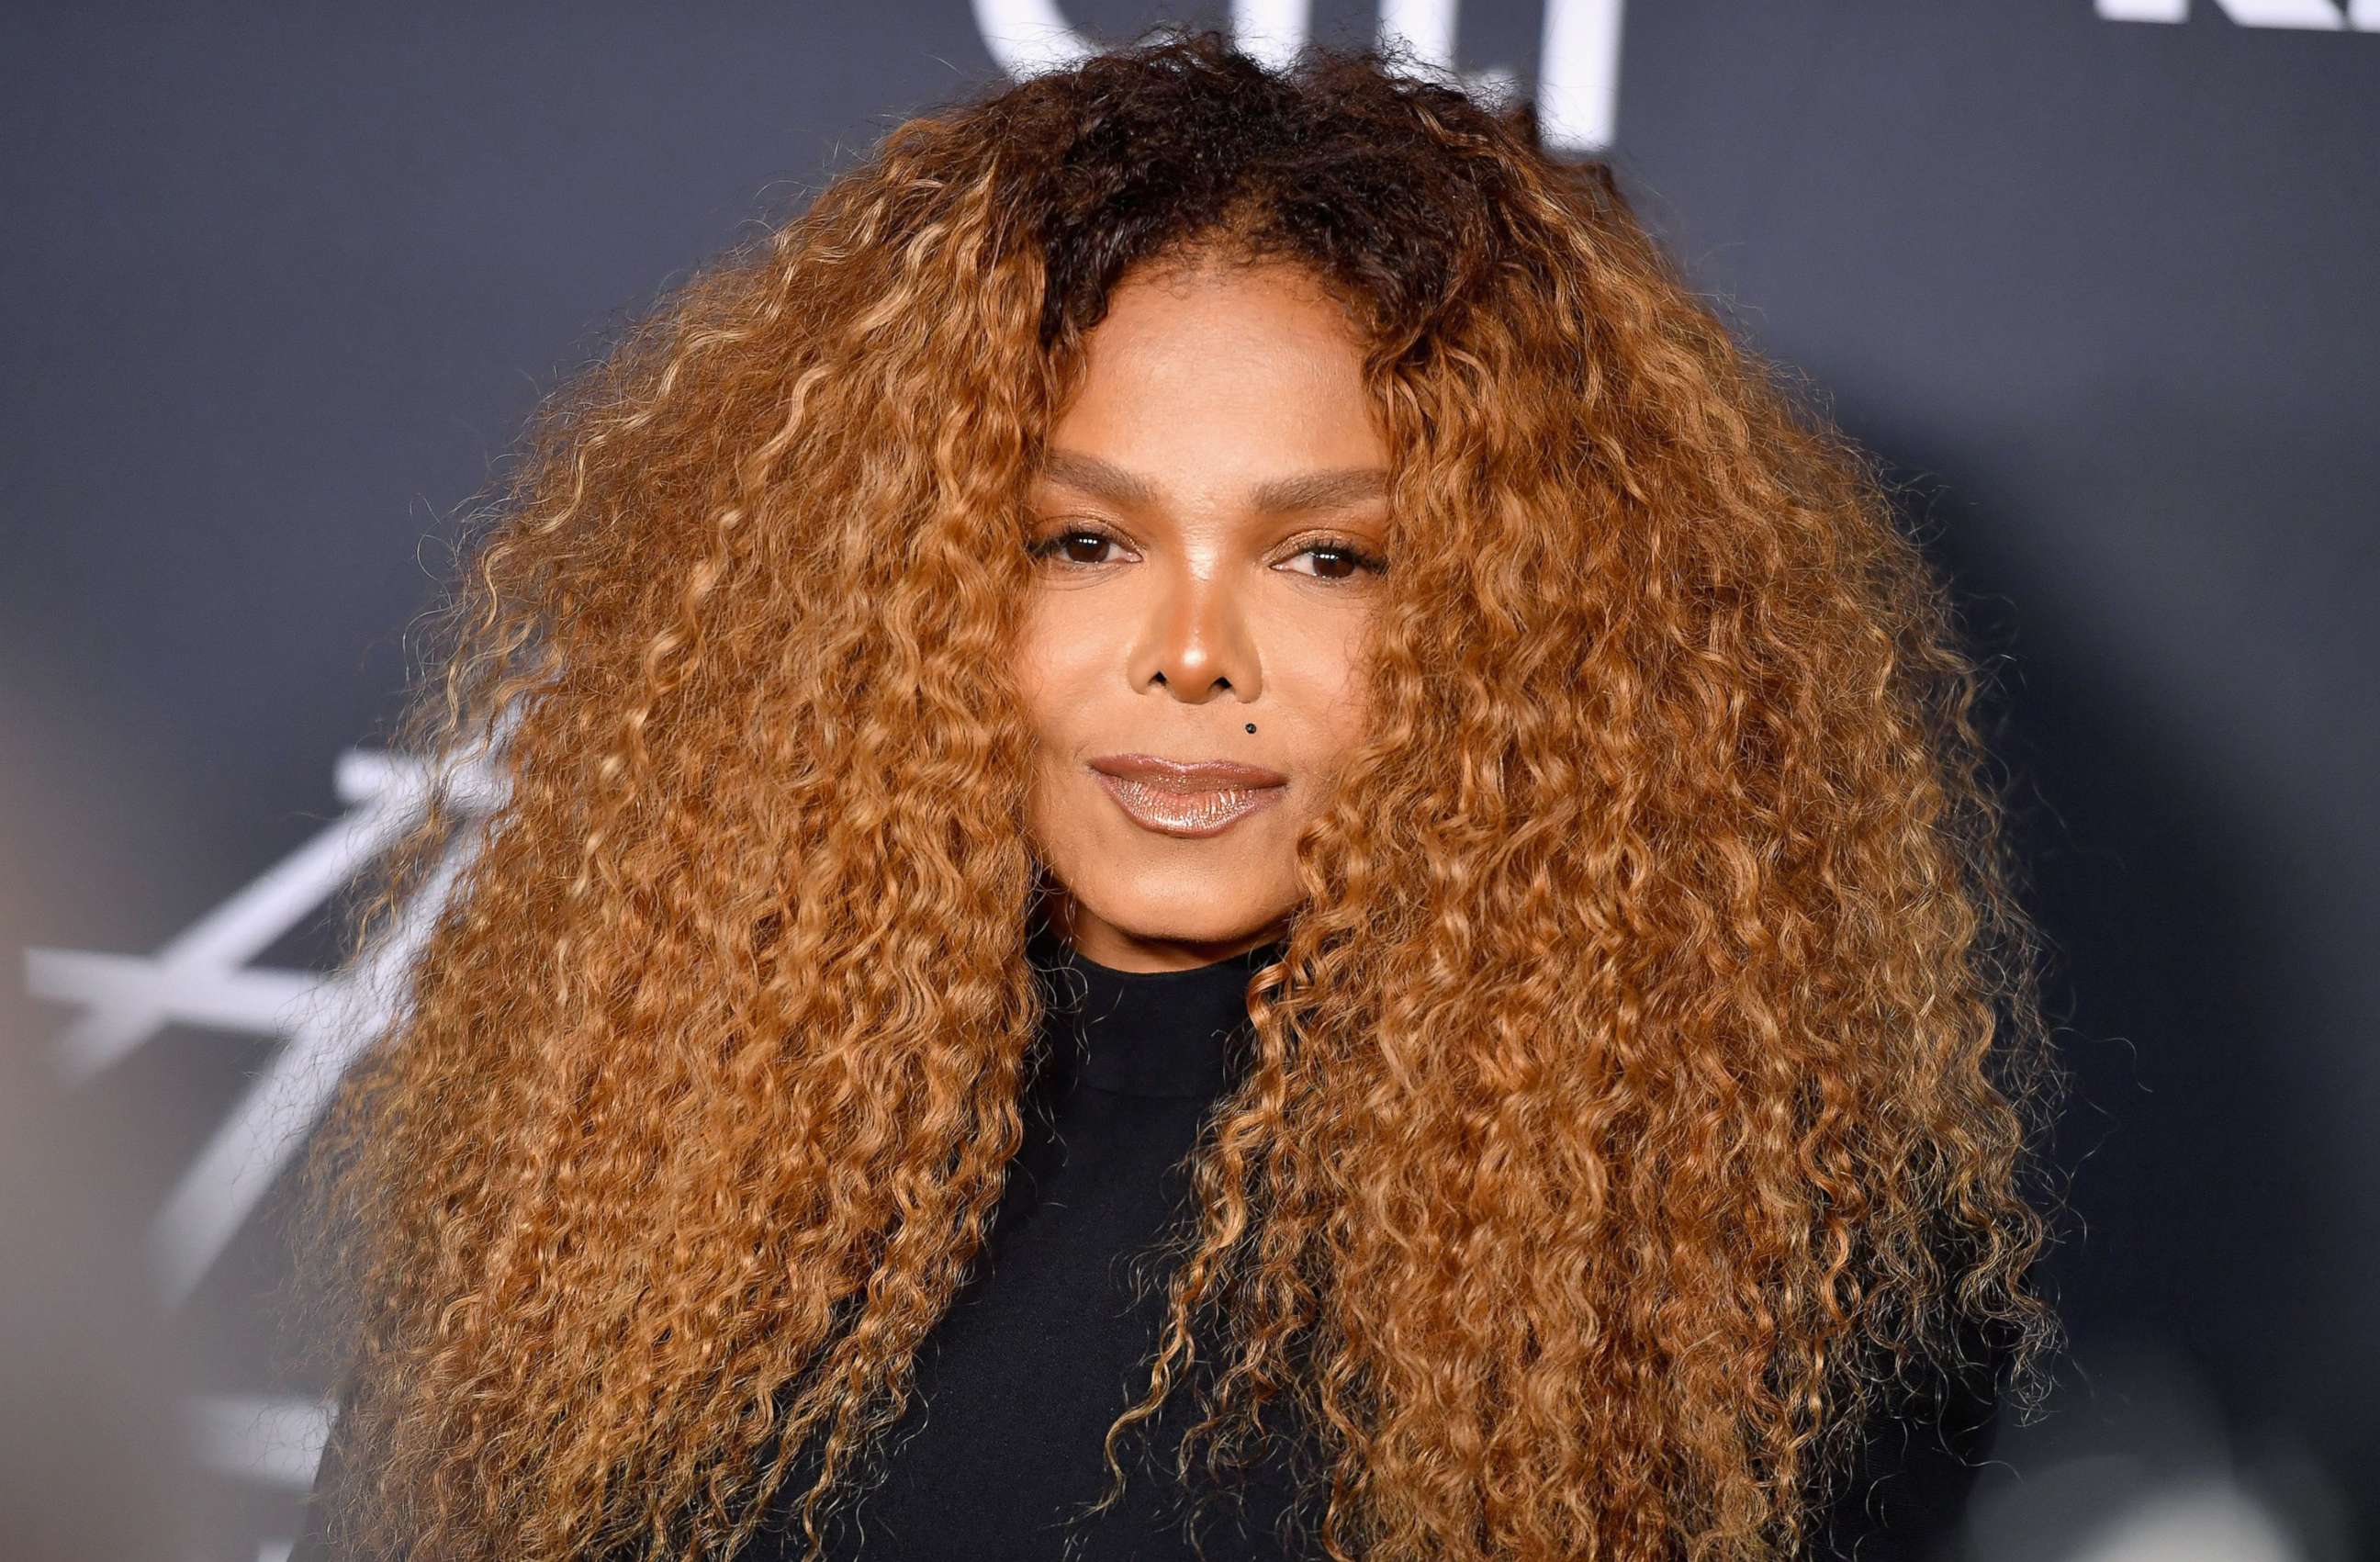 PHOTO: Janet Jackson attends the Rock & Roll Hall of Fame Induction Ceremony in New York, March 29, 2019.